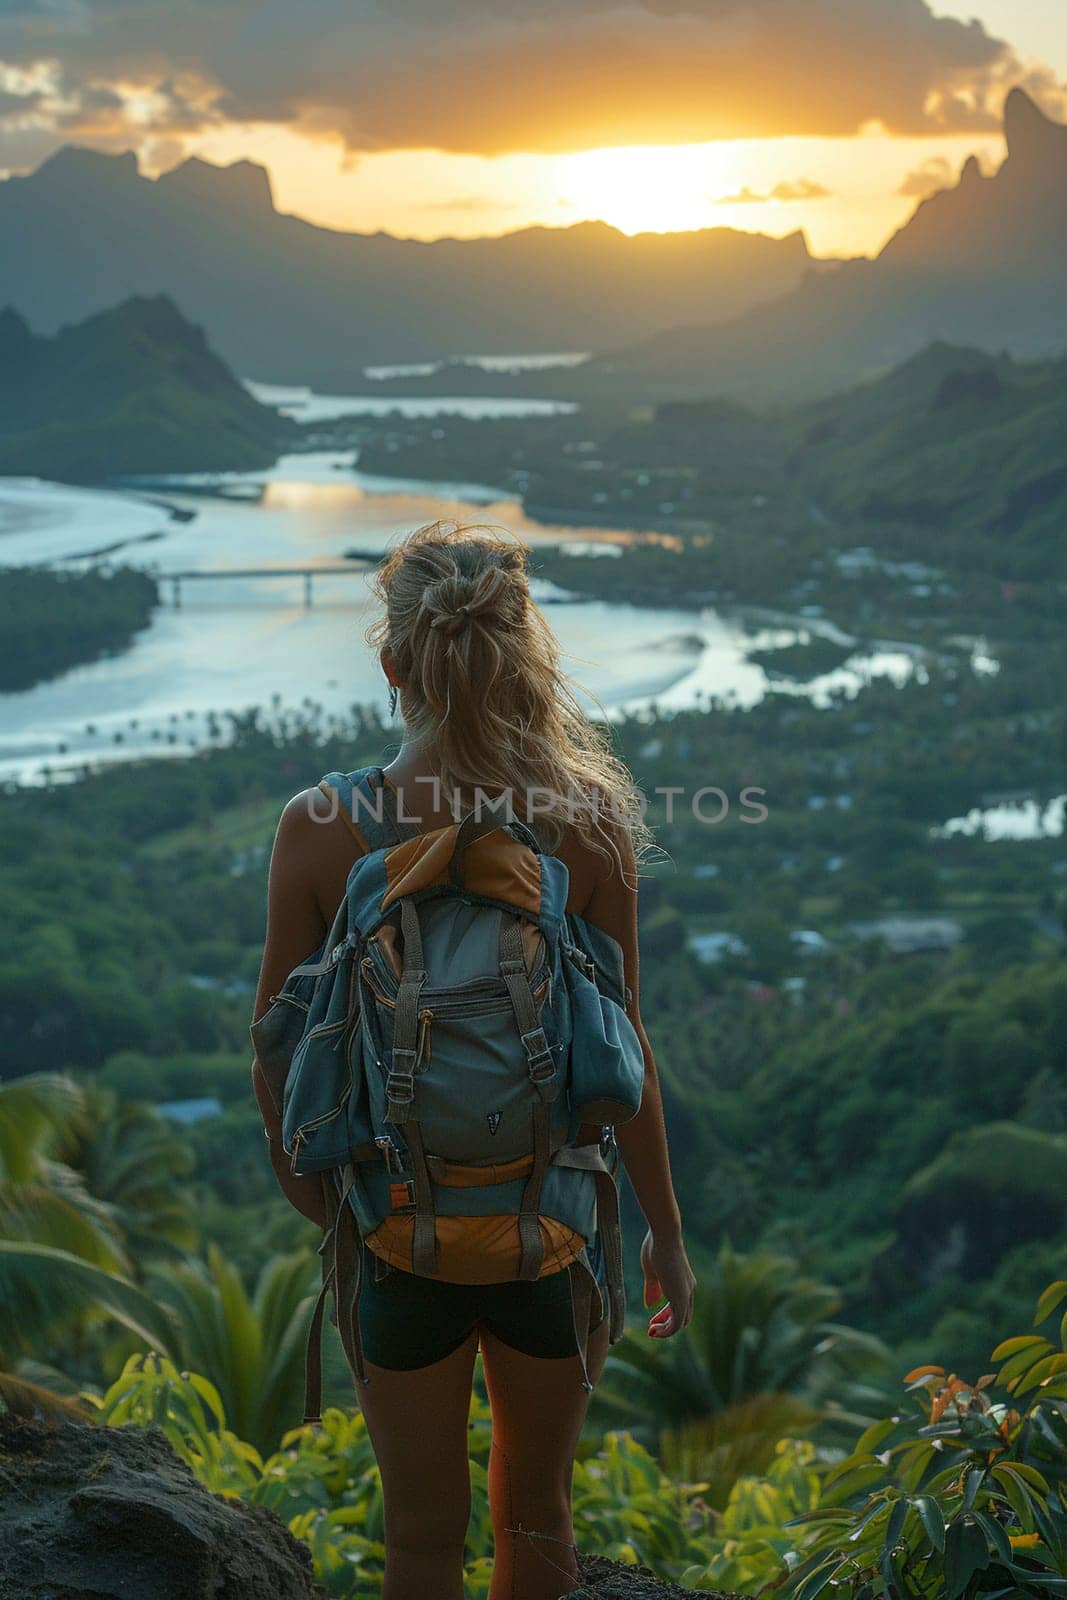 Backpacker standing at a scenic overlook, capturing the spirit of travel and discovery.